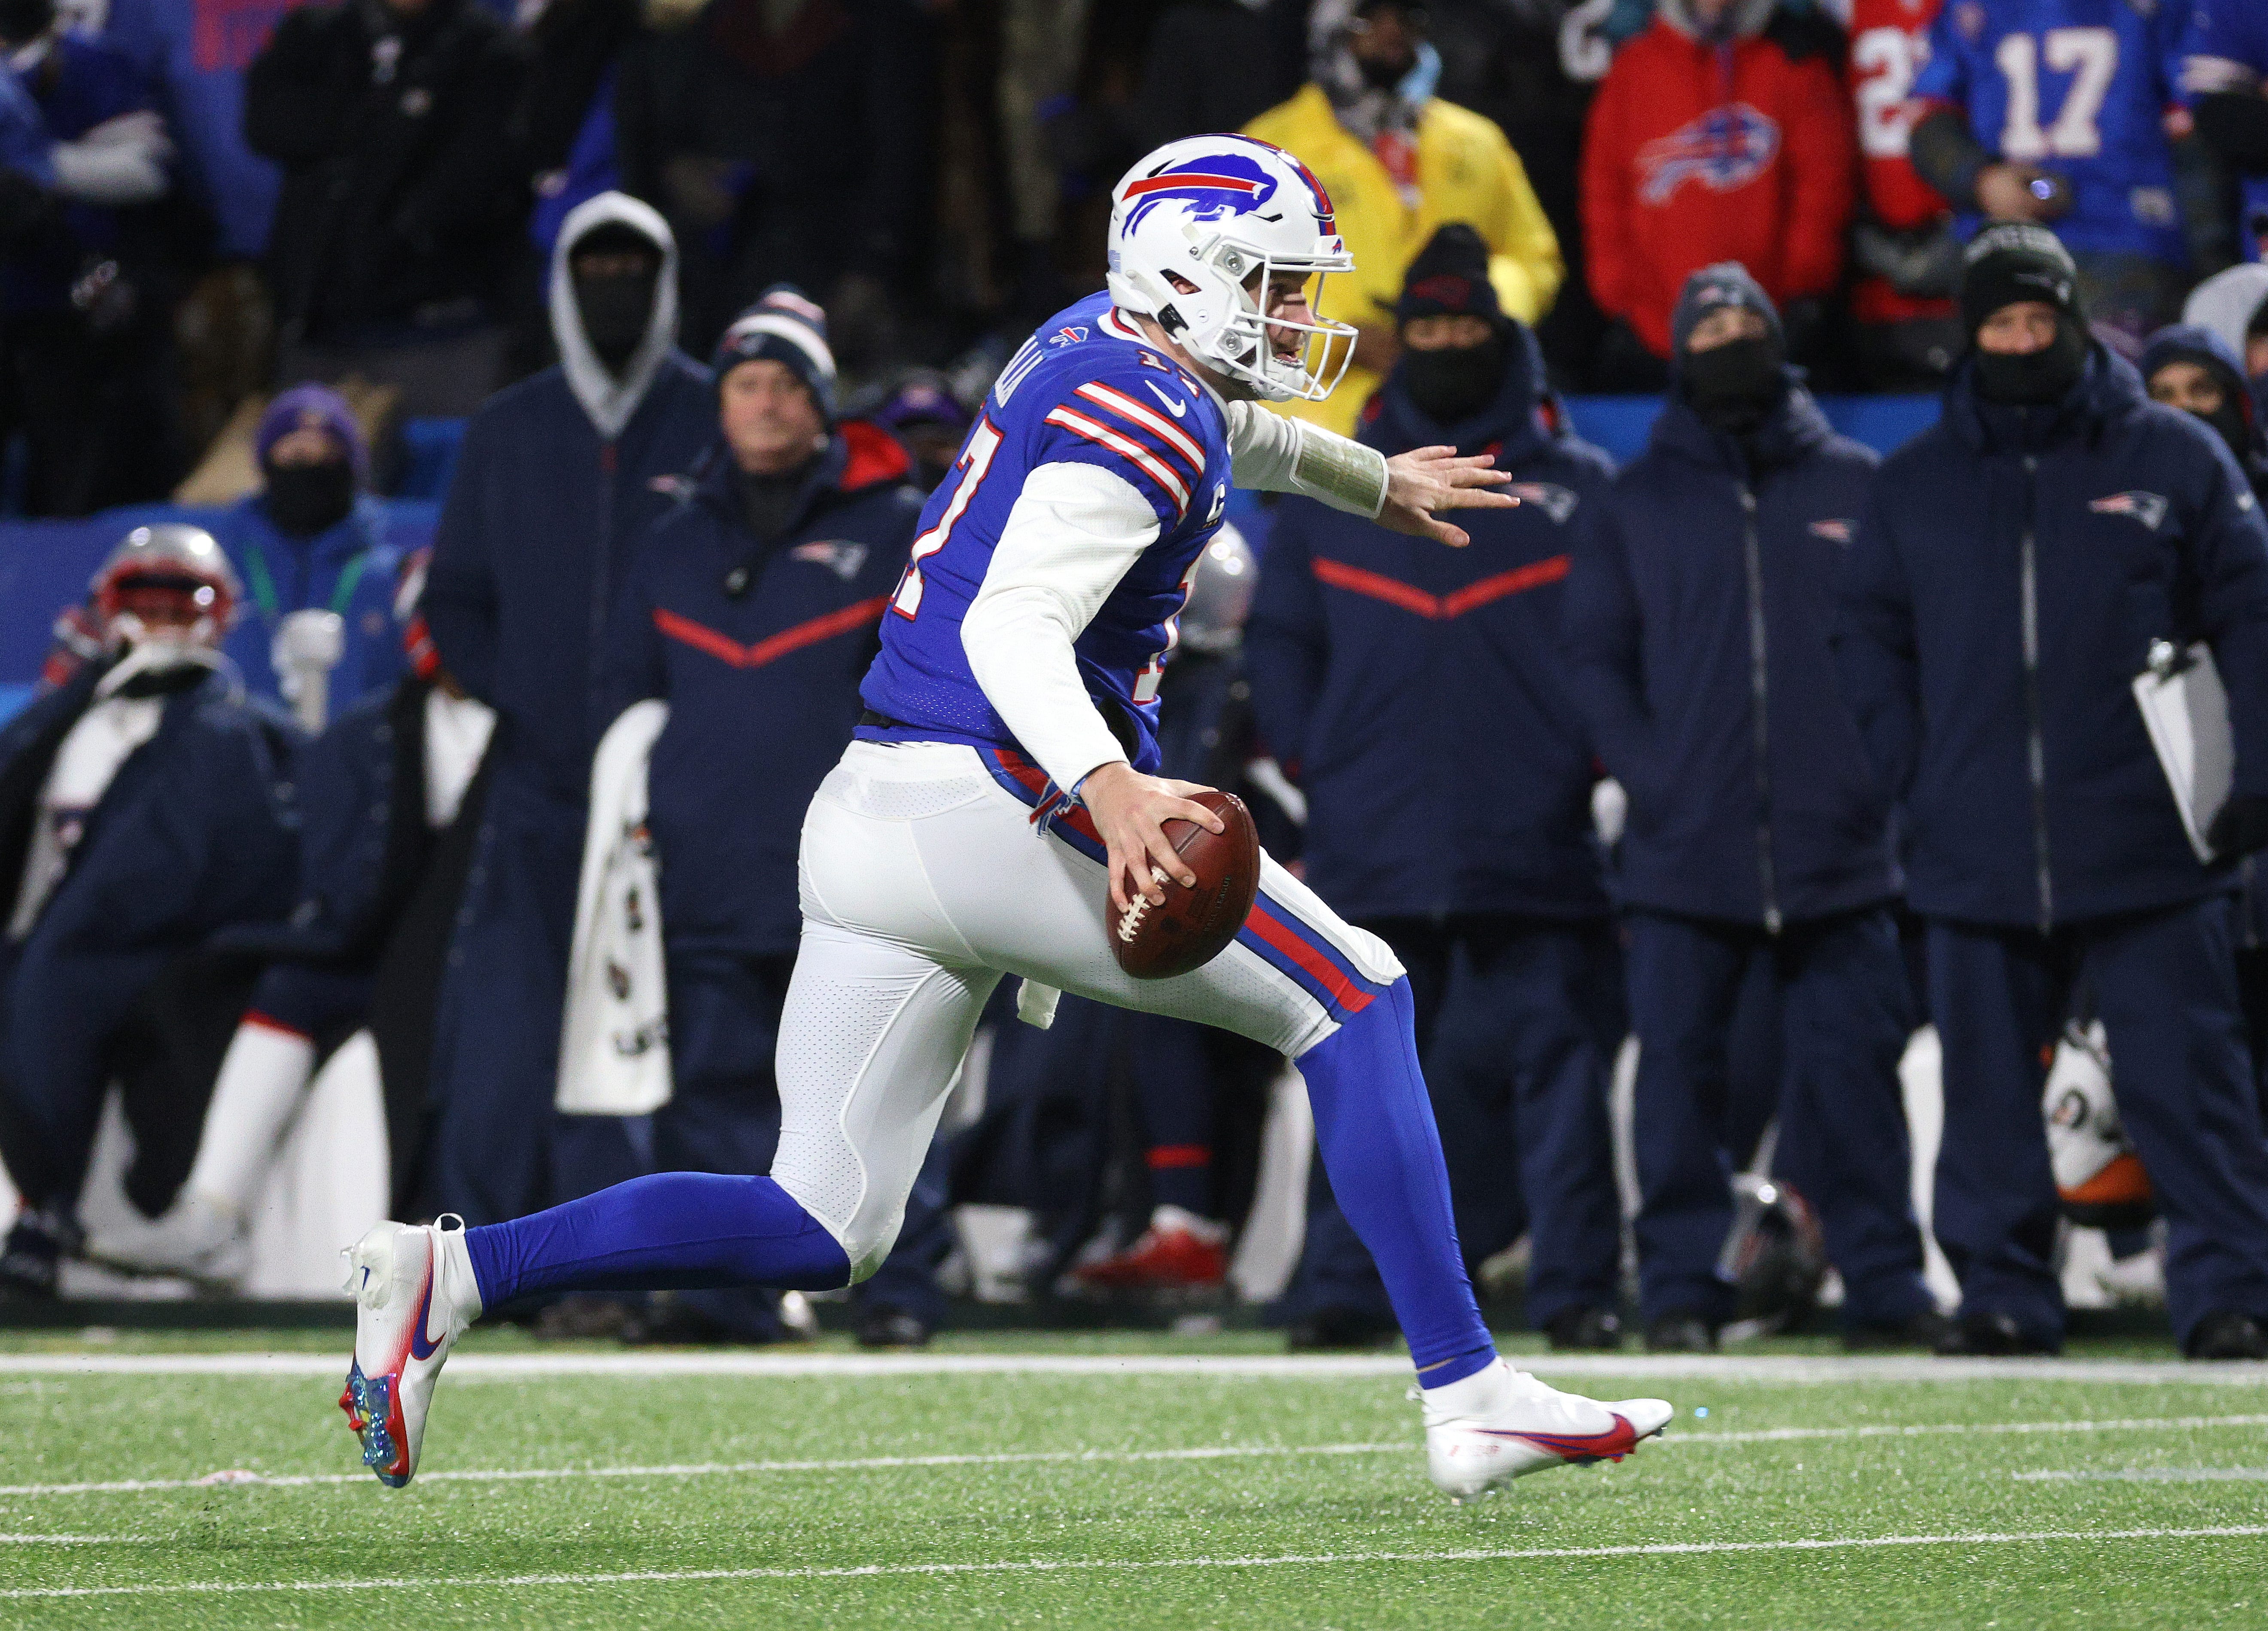 Josh Allen was so good, even when he tried to throw a pass away, it wound up a touchdown